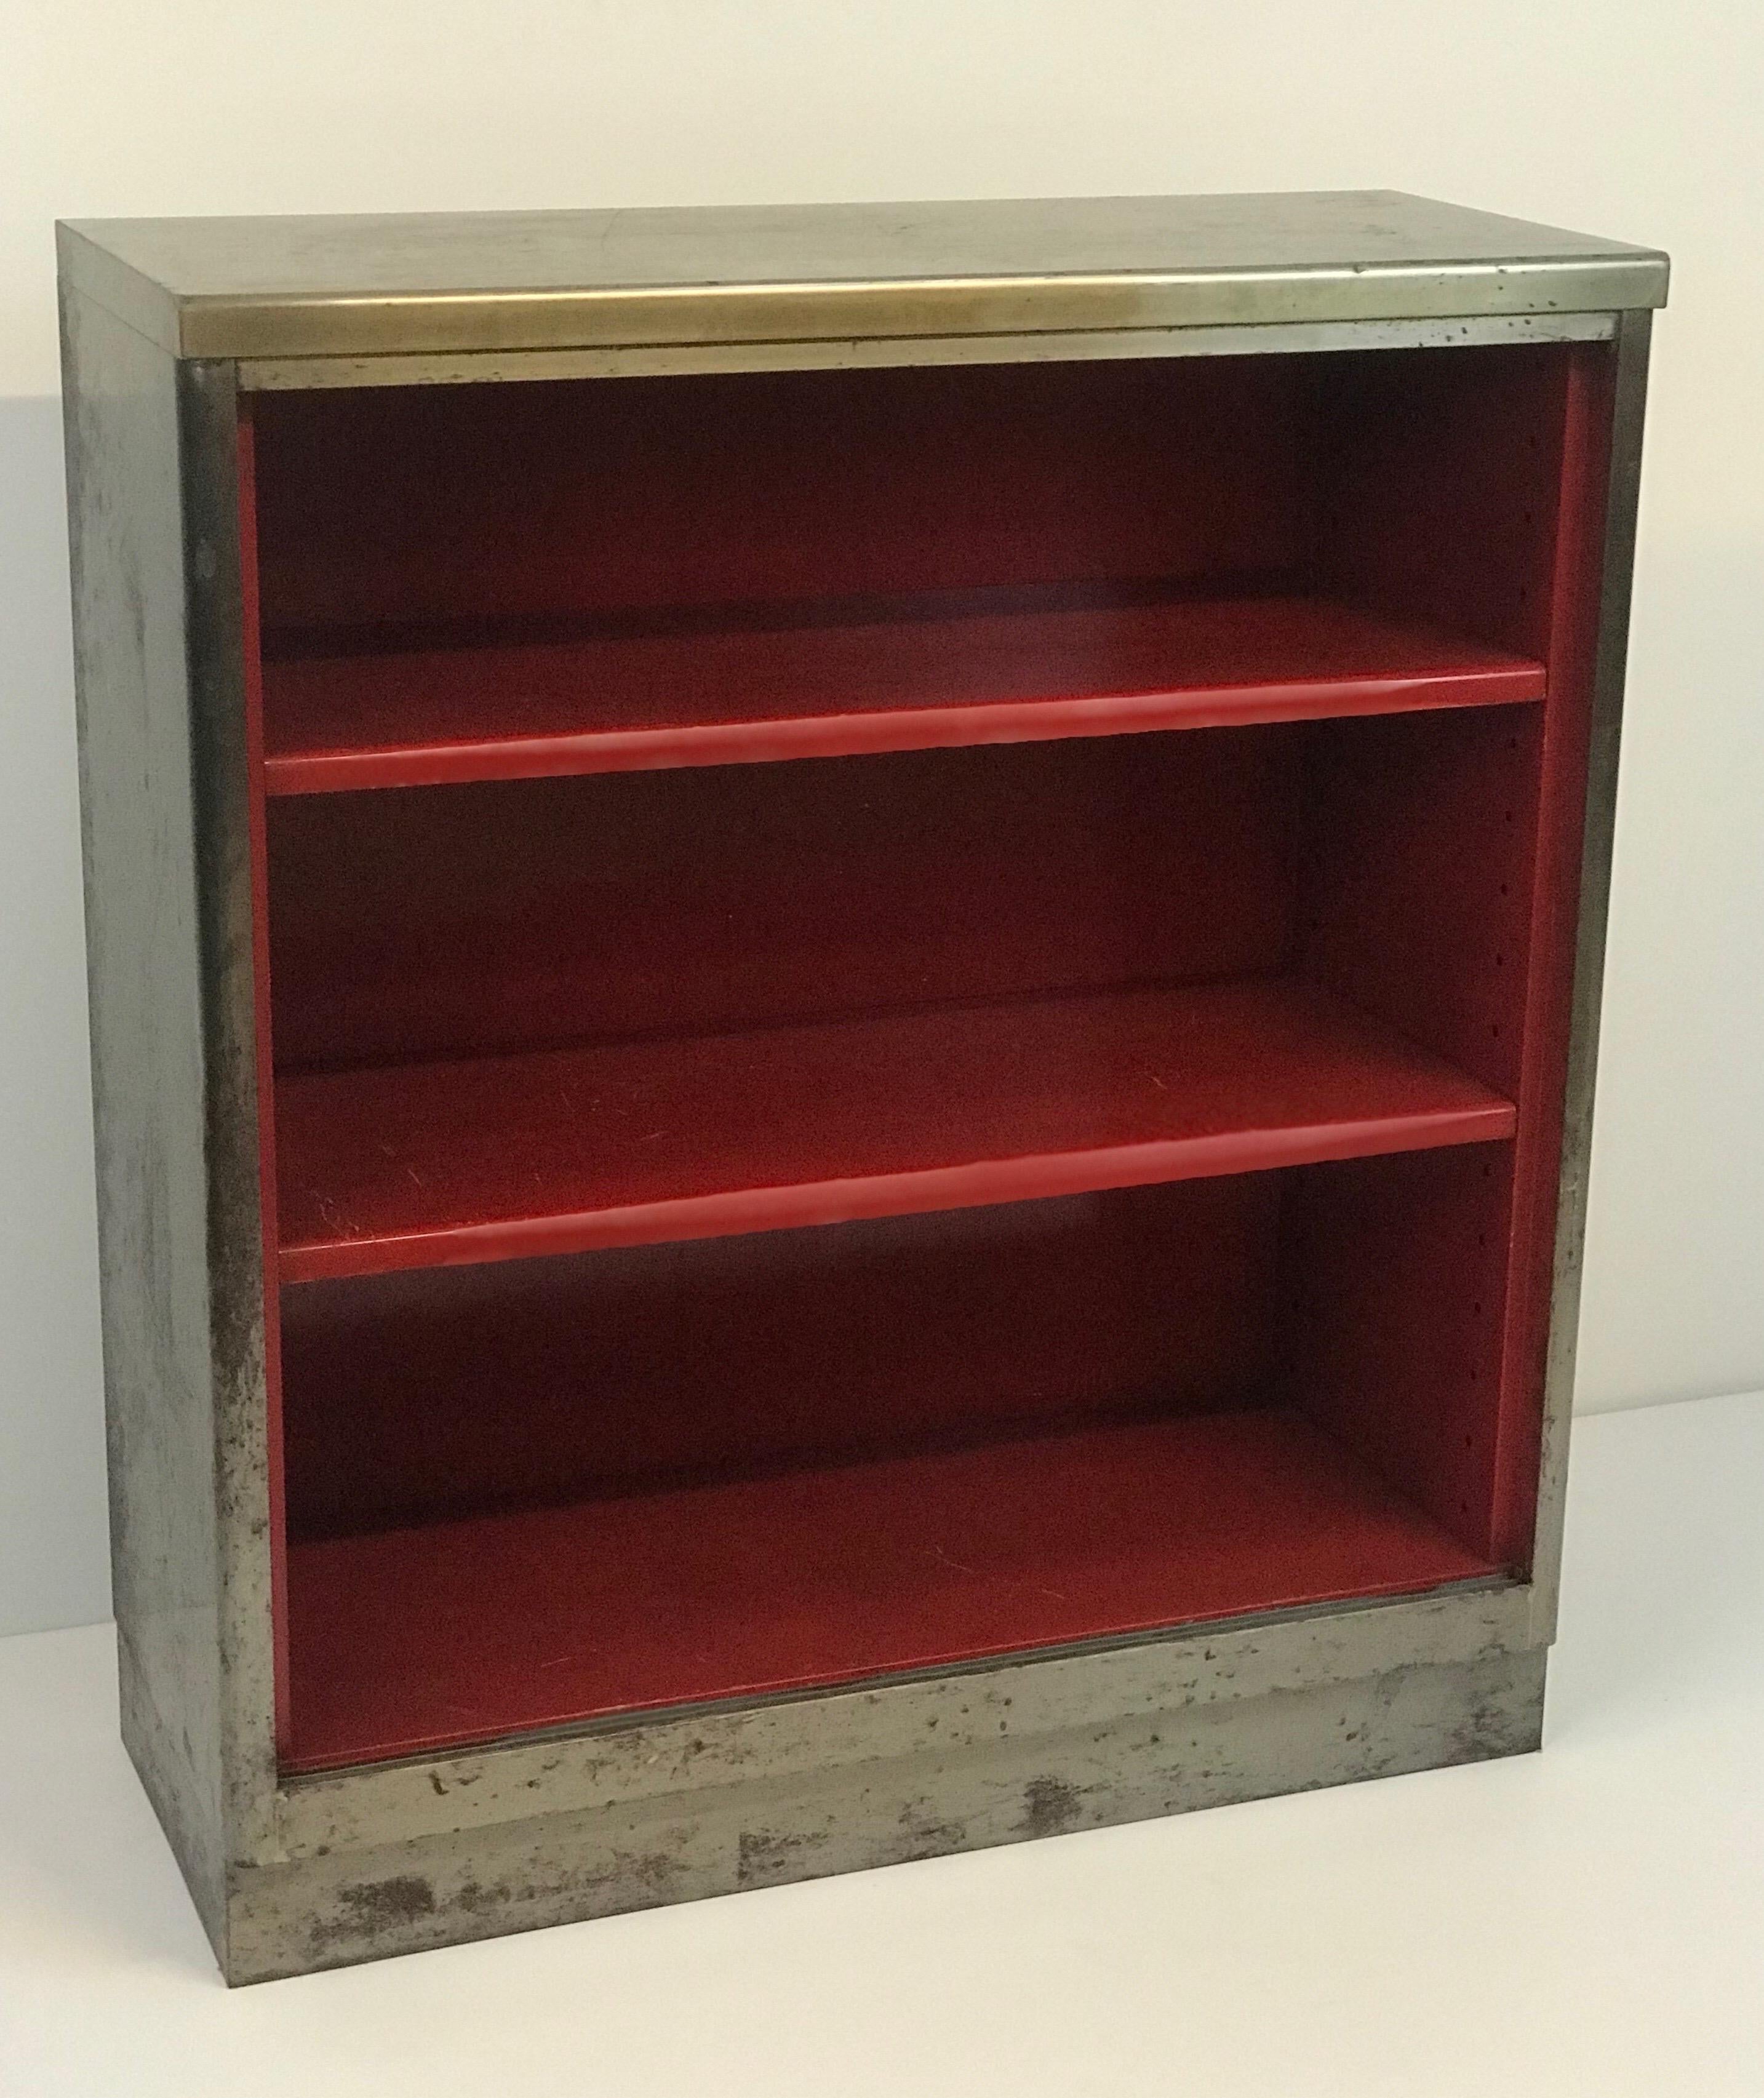 A 1960's Brushed steel bookcase with an interior painted in heavy automotive grade red paint. Made by Art Metal inc of Jamestown NY in a neutral or industrial color scheme the piece was likely stripped in the 1990's when the brushed steel look was